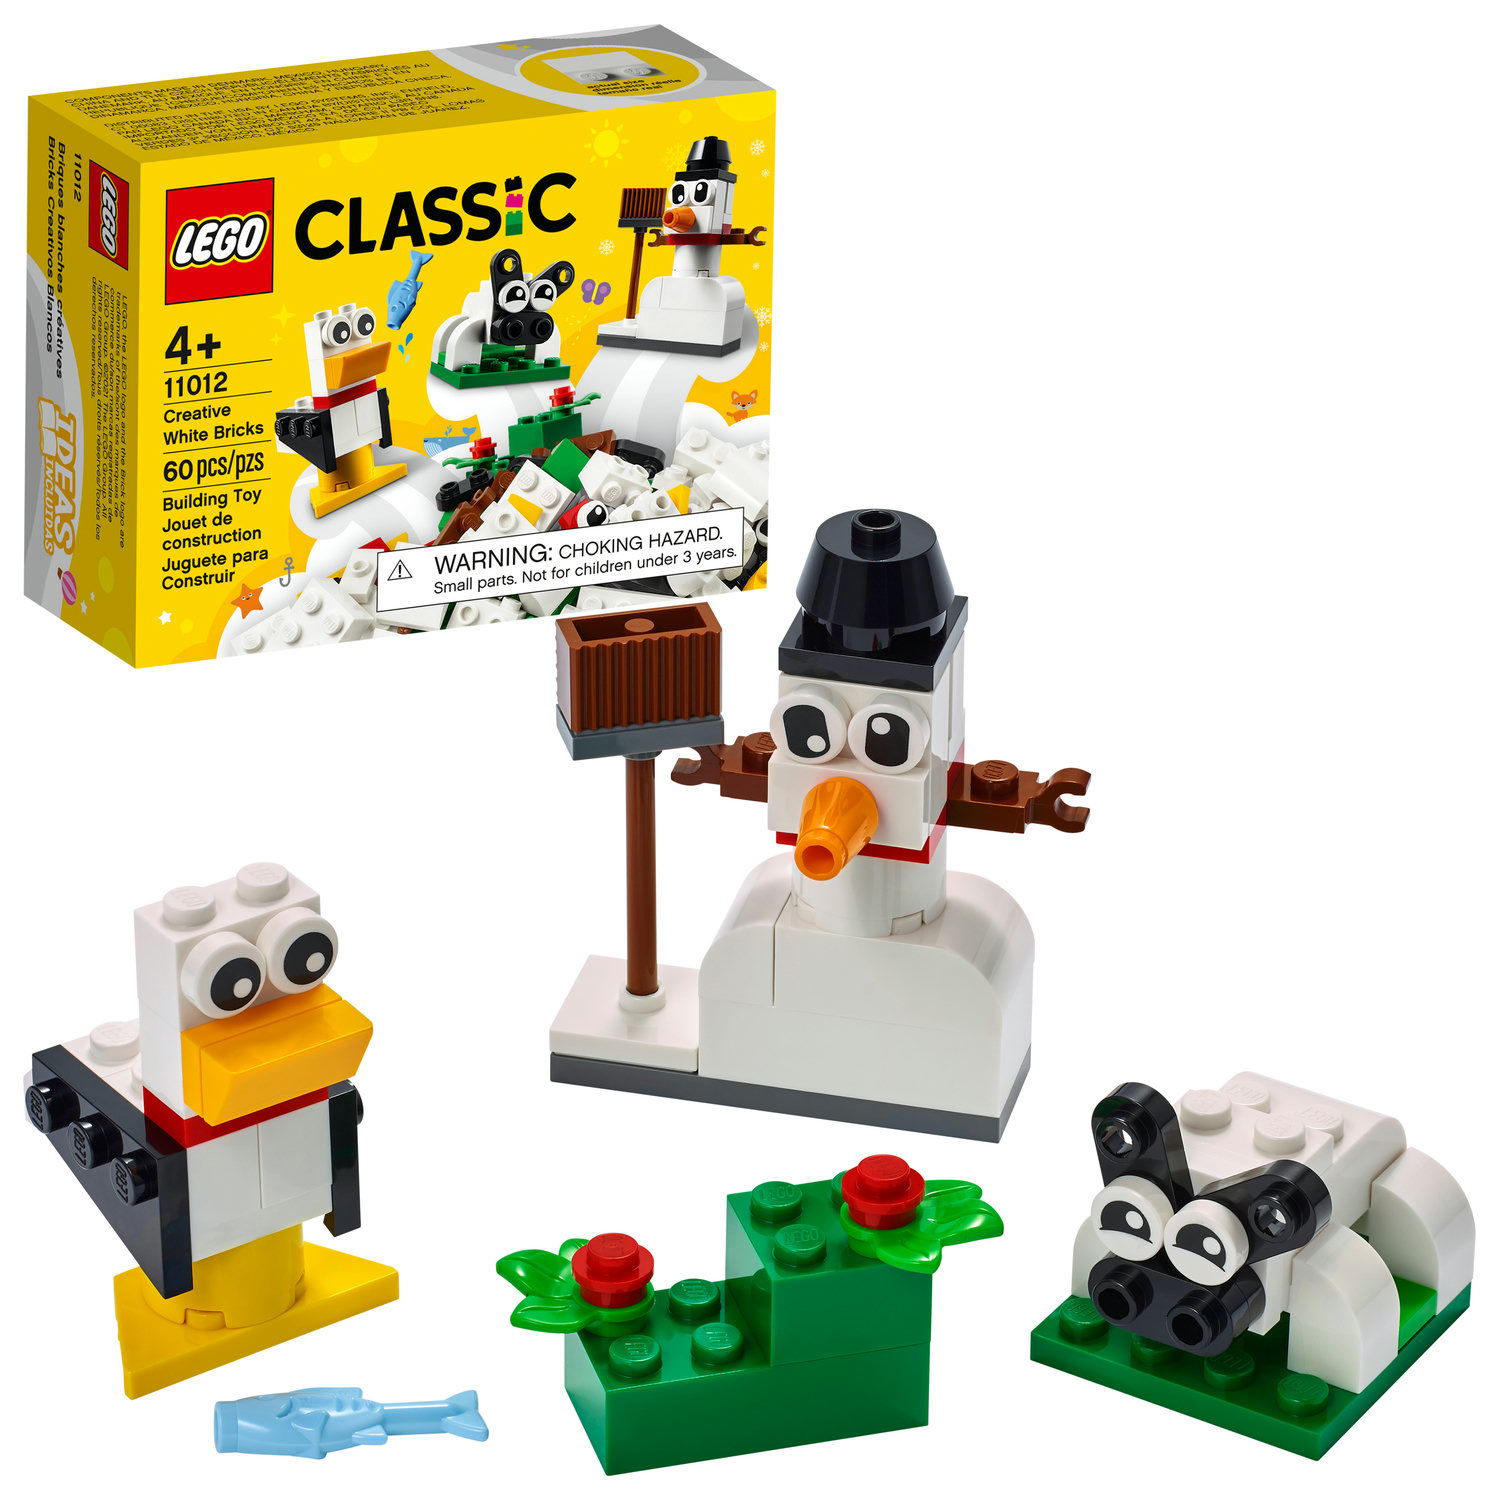 LEGO Classic Creative White Bricks 11012 Building Toy to Inspire Creative Play (60 Pieces) - image 1 of 5